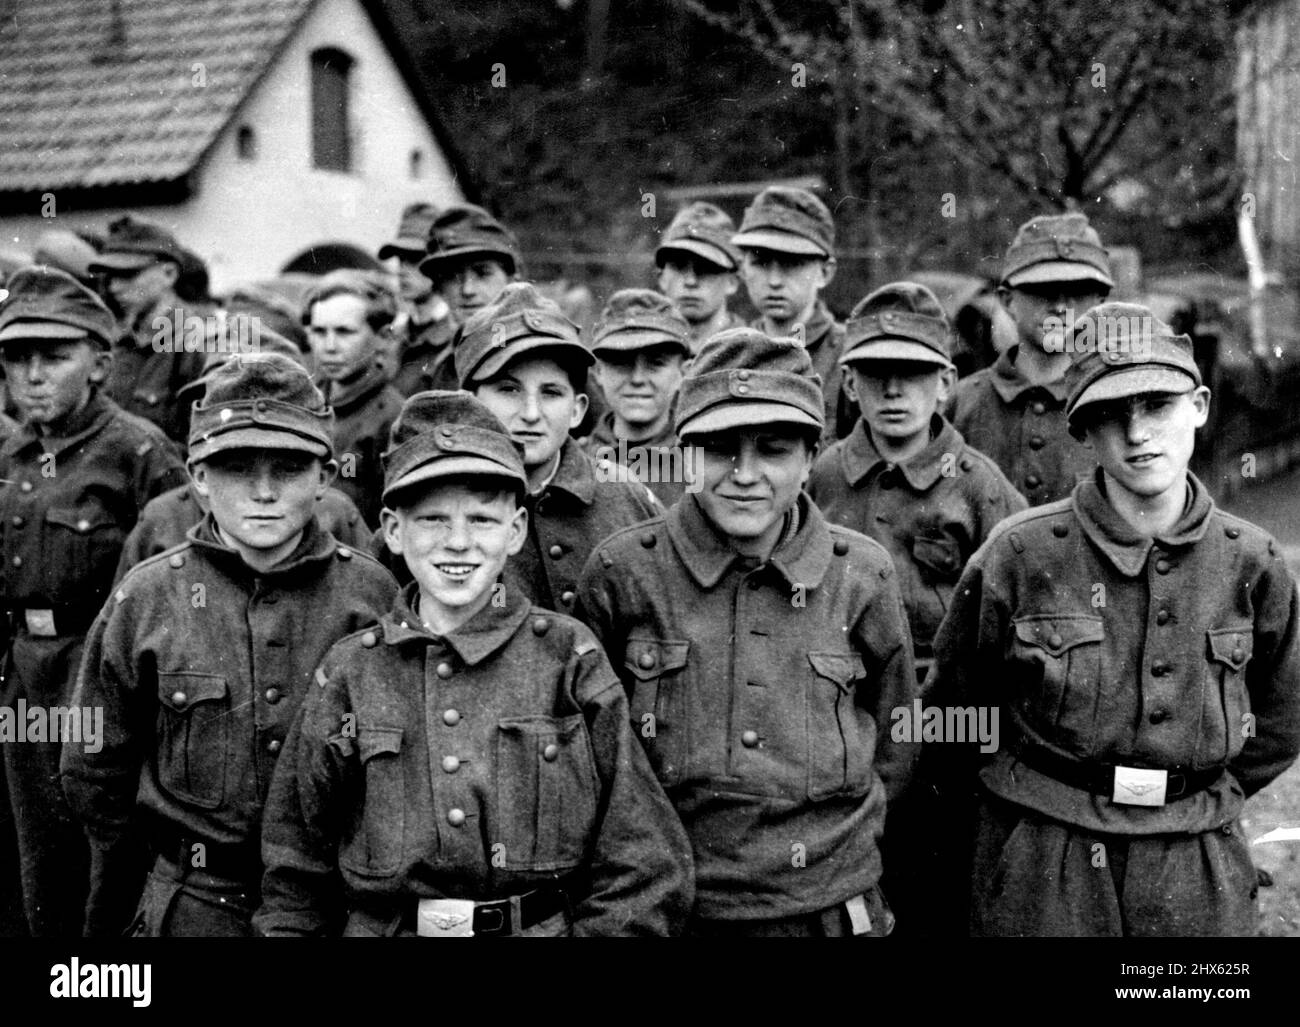 German Boy Soldiers Captured by 11th., Division -- A group of the youngsters in their uniforms. The Americans sent them back to their parents, instead of to a prison camp. When the 11th., Armoured division advanced into the area, of Kronach, they found that all the boys of 15 and get on the road to Bavaria. They were taken by their 22-years-old leader into the woods and there waited the arrival of the Americans to whom they gave themselves up. April 25, 1945.;German Boy Soldiers Captured by 11th Stock Photo